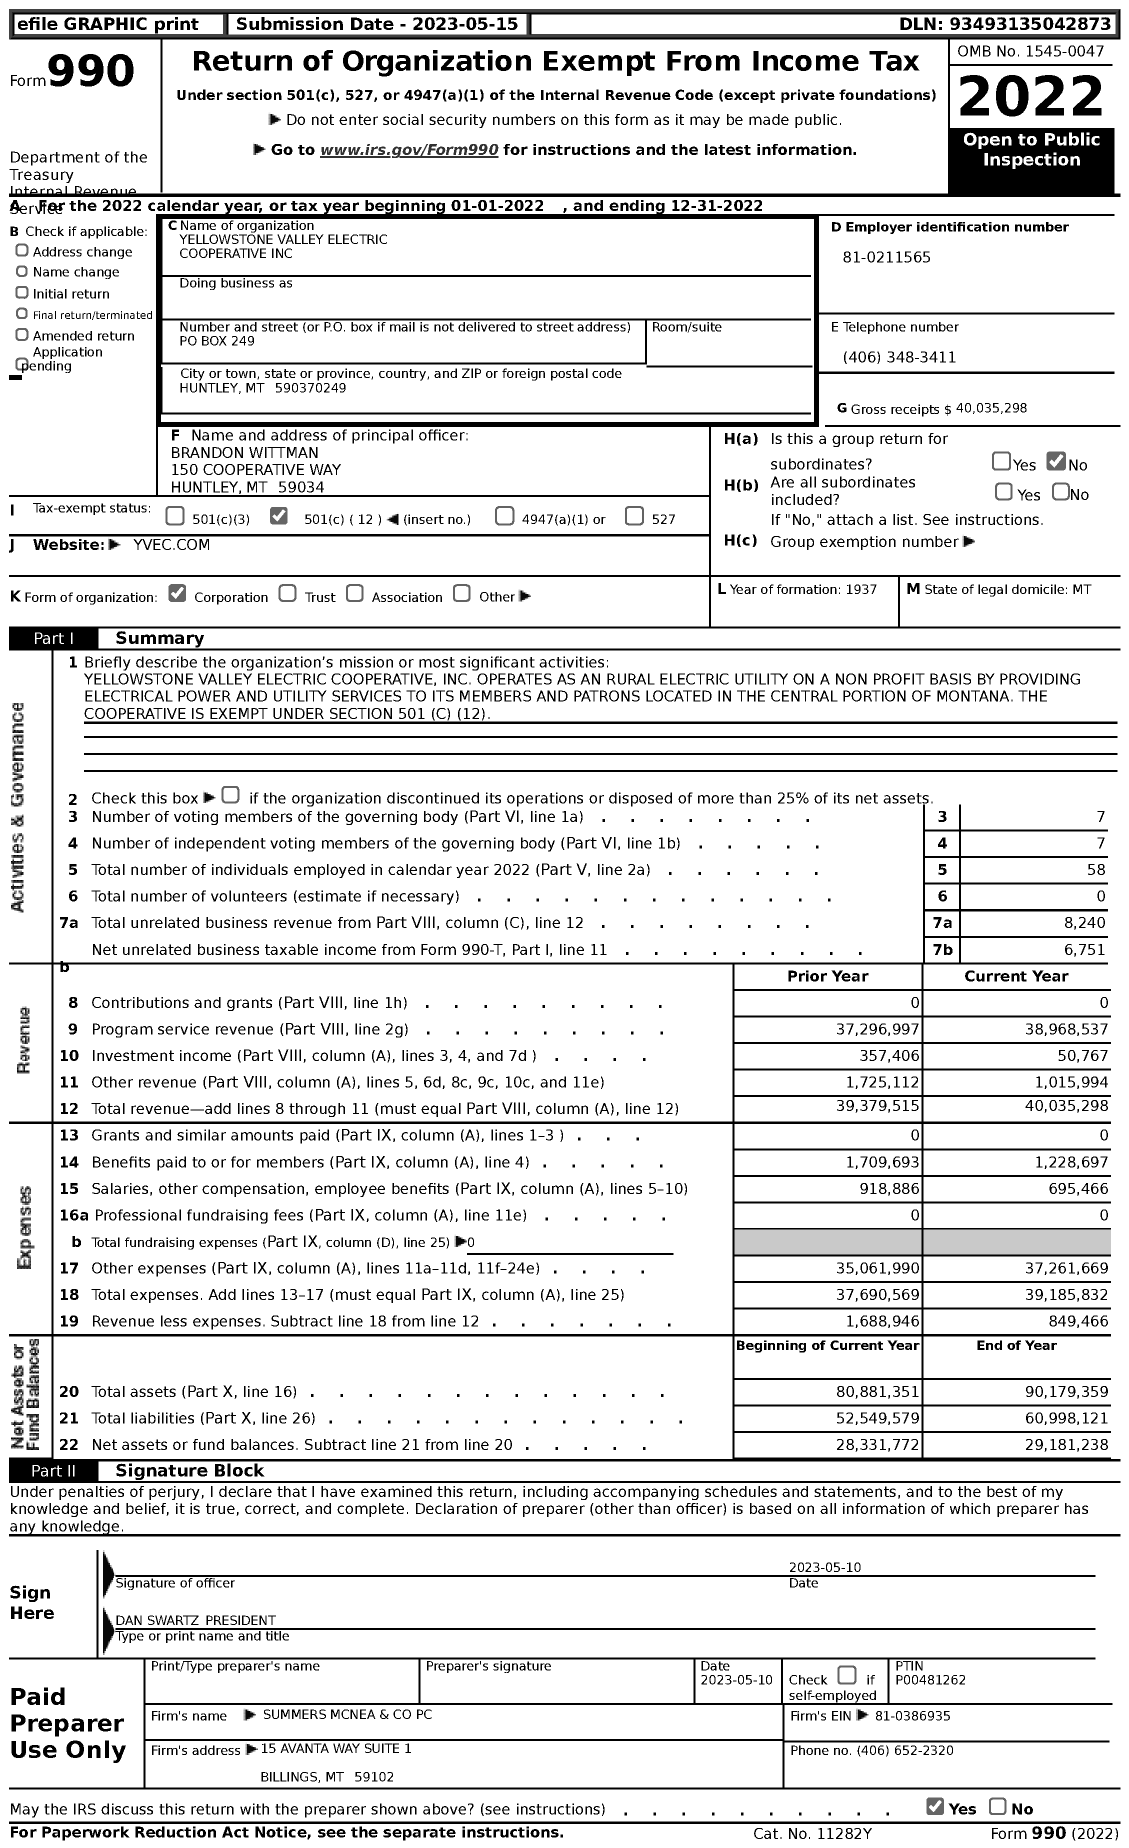 Image of first page of 2022 Form 990 for Yellowstone Valley Electric Cooperative